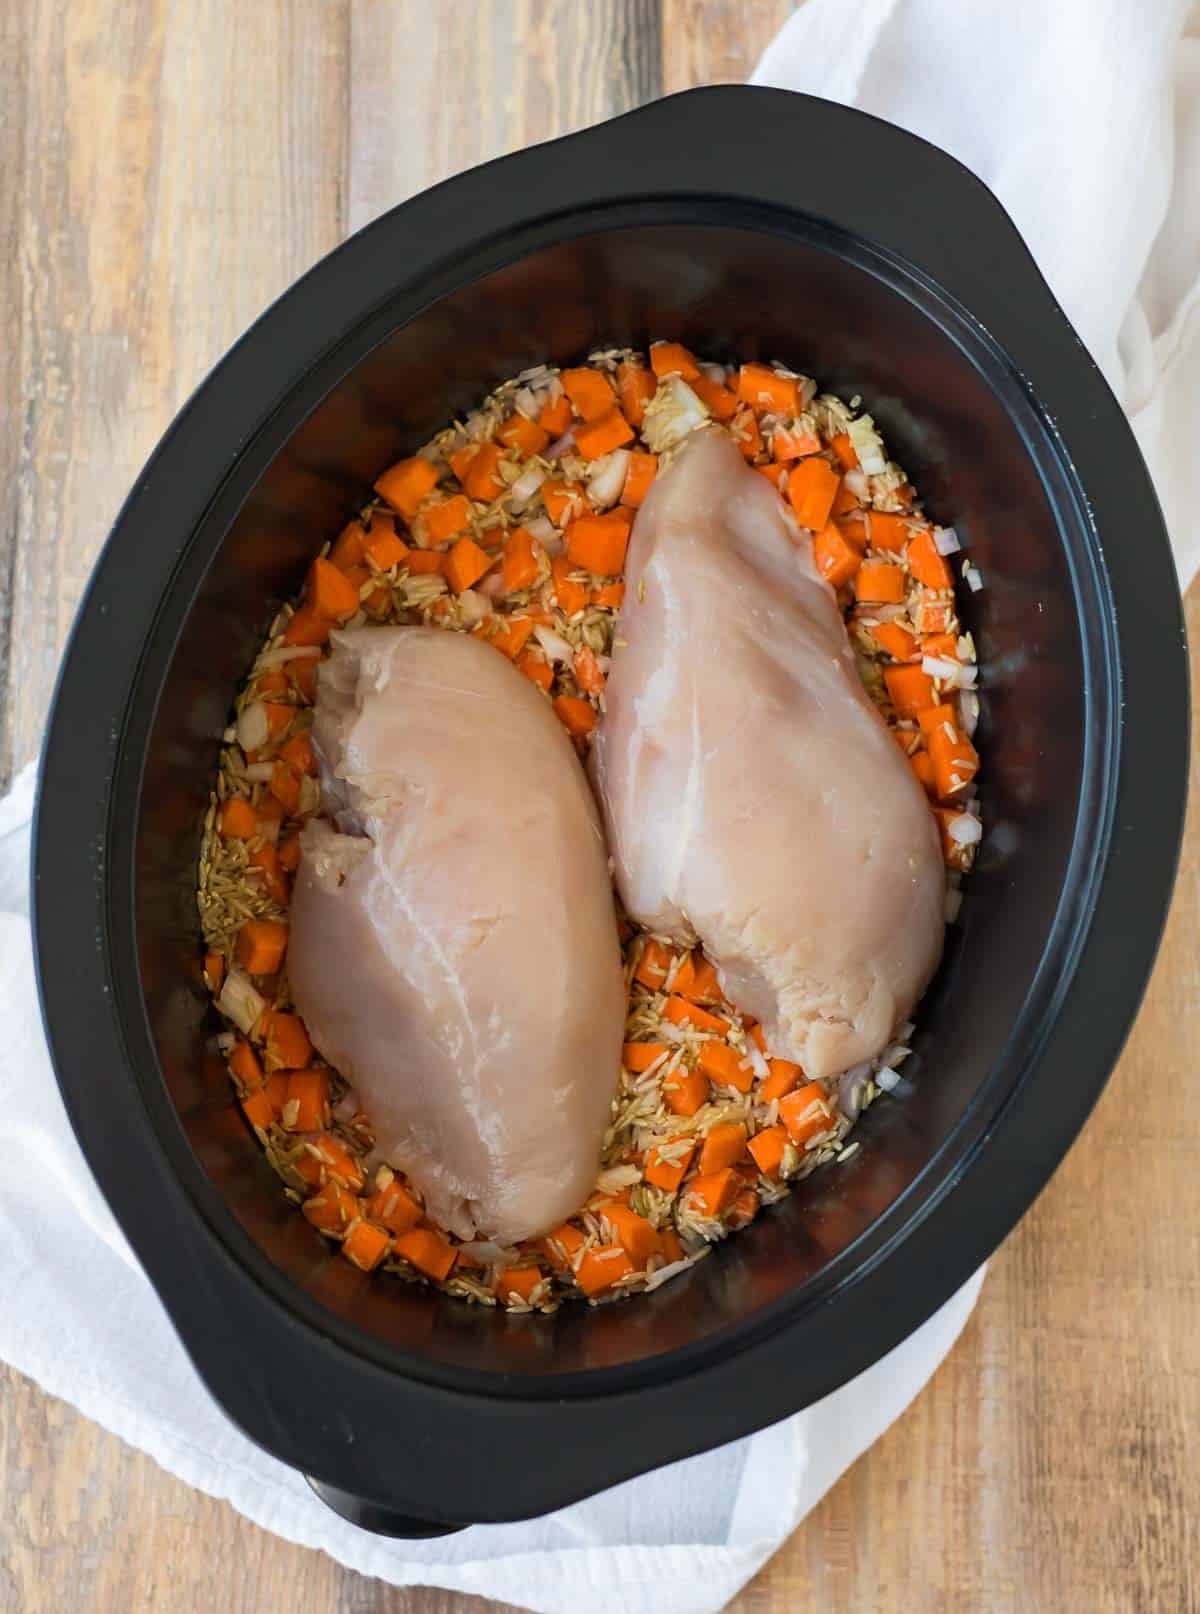 Two pieces of raw poultry on a bed of vegetables and grains in a slow cooker